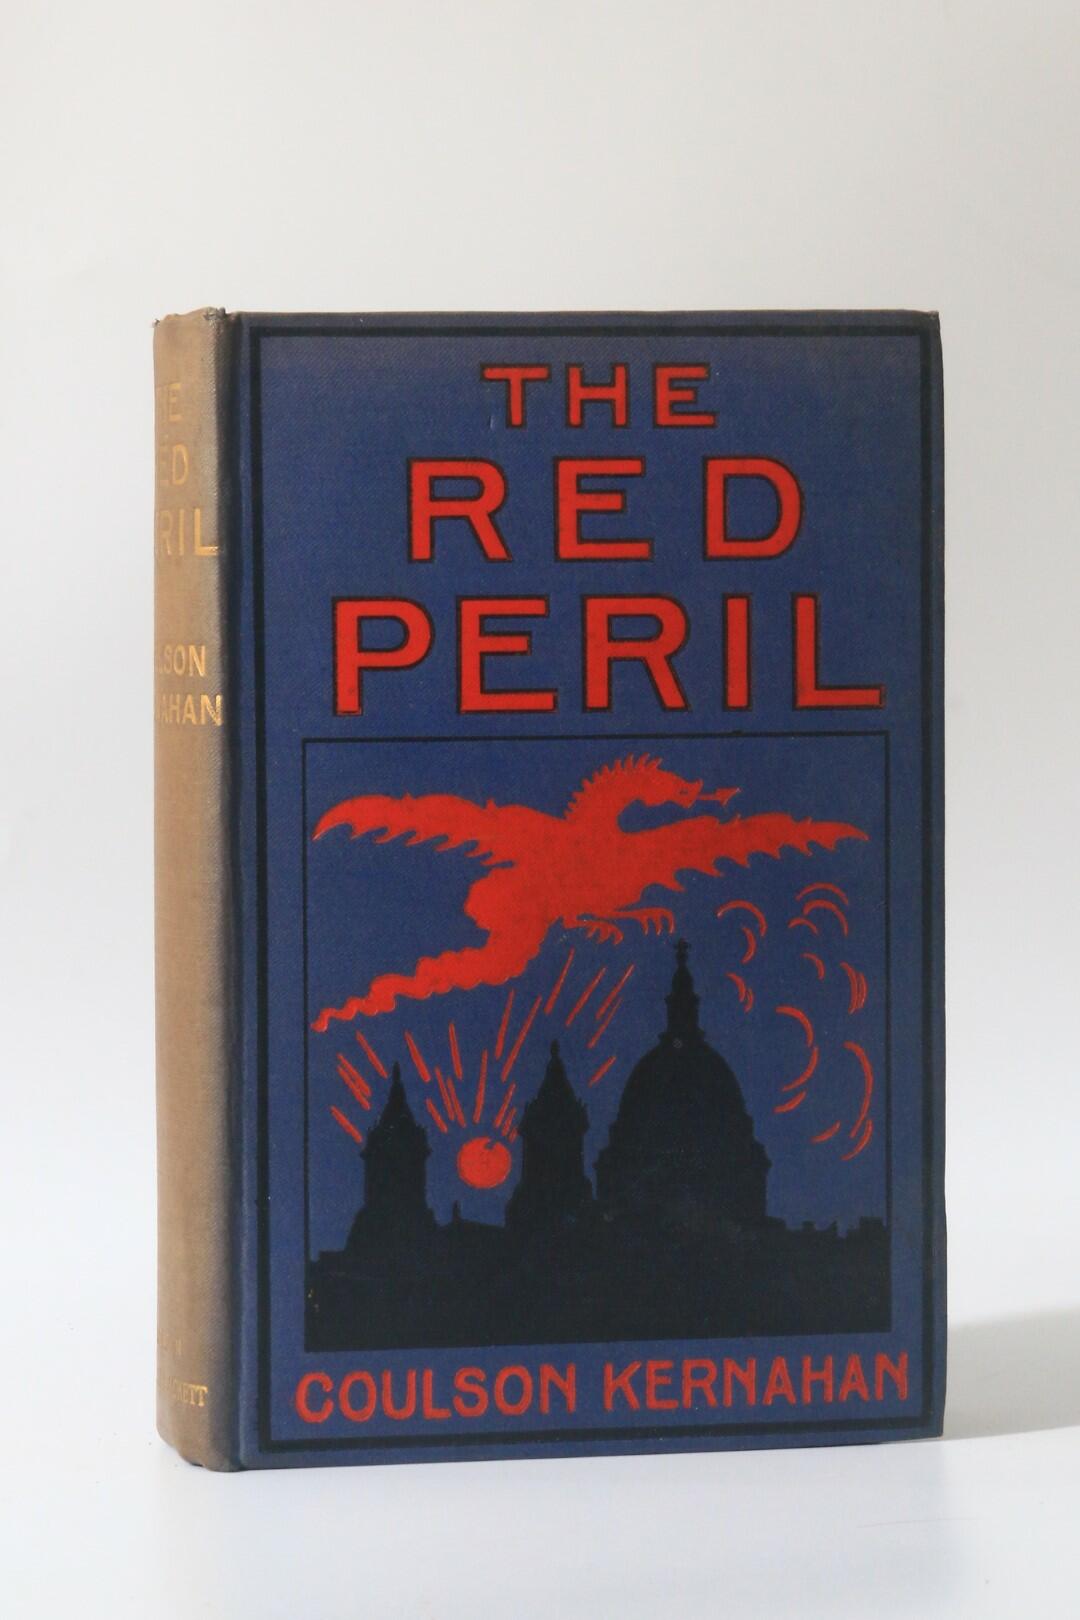 Coulson Kernahan - The Red Peril - Hurst & Blackett, 1908, First Edition.